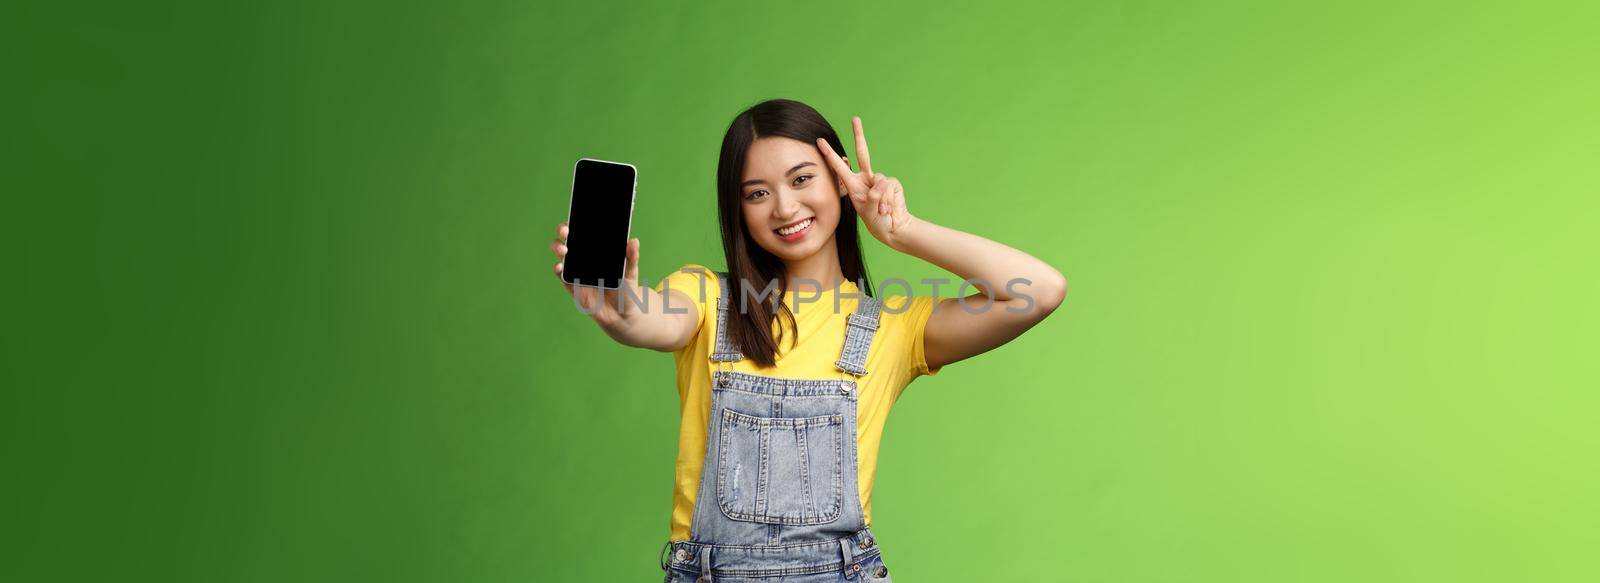 Cute carefree asian brunette showing application on smartphone screen, make victory peace sign, smiling joyfully, brag social media popularity, followers amount, stand green background by Benzoix